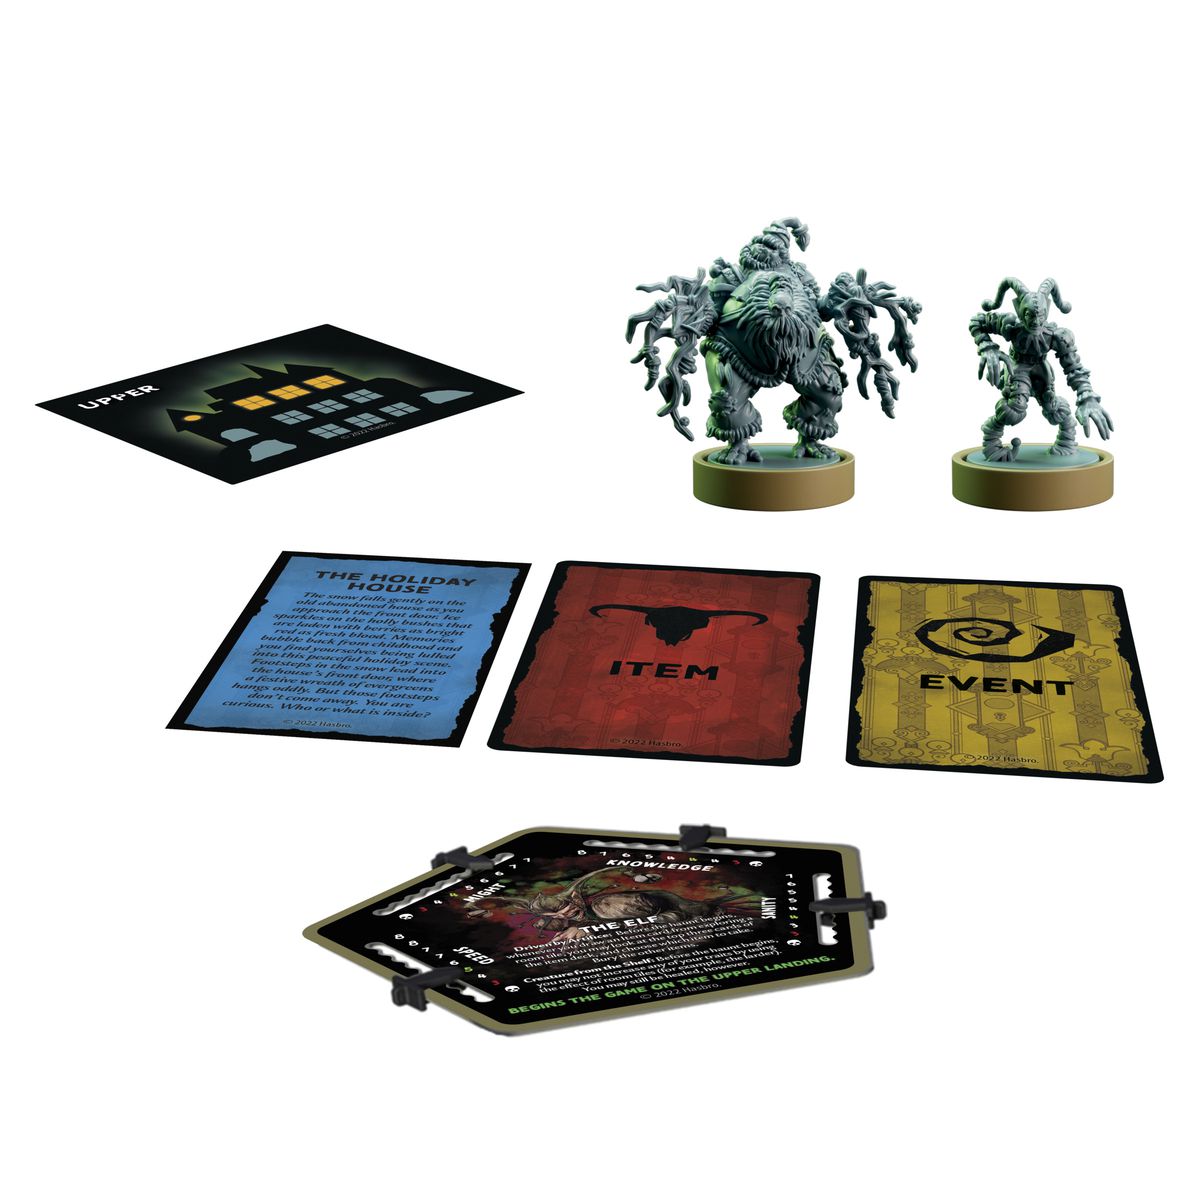 A new room card, a character card, and some miniatures rendered alongside a narrative card, and item card, and an event card back.